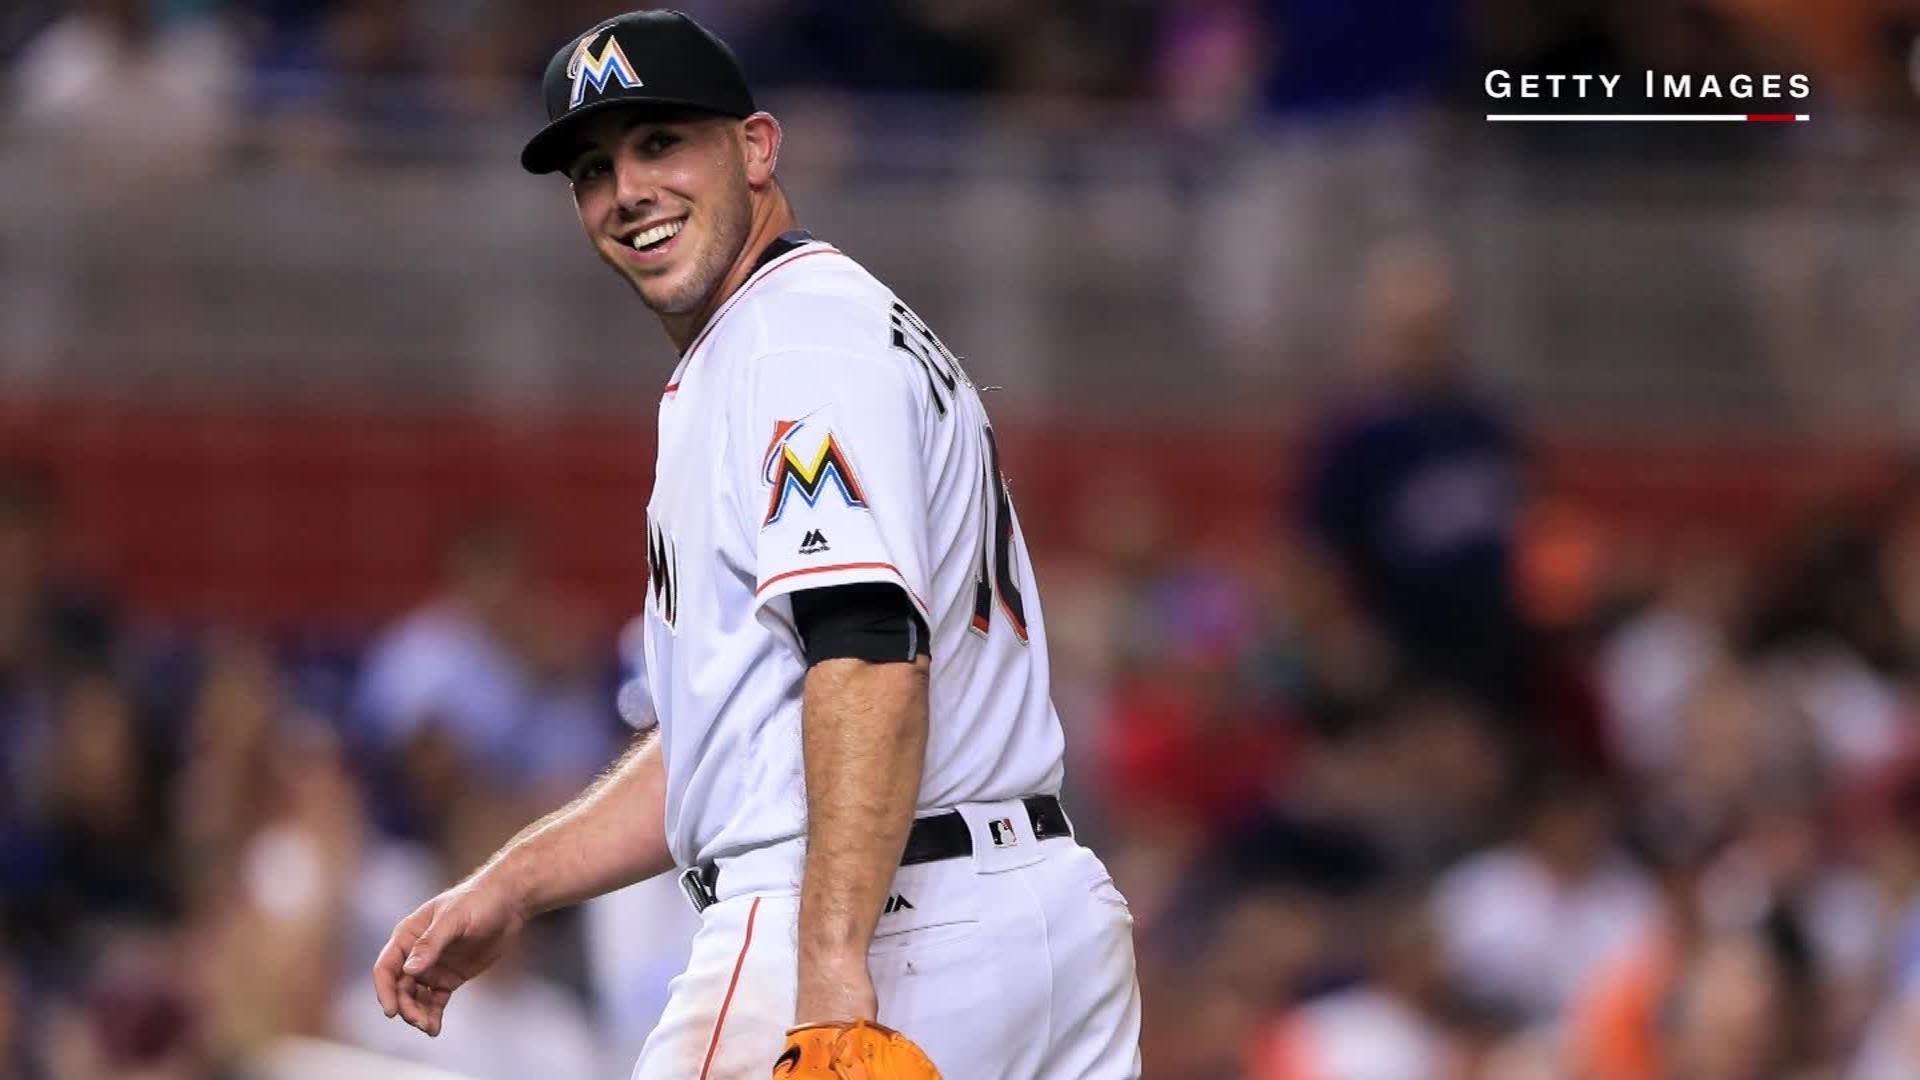 Jose Fernandez was likely operating boat in deadly crash: report